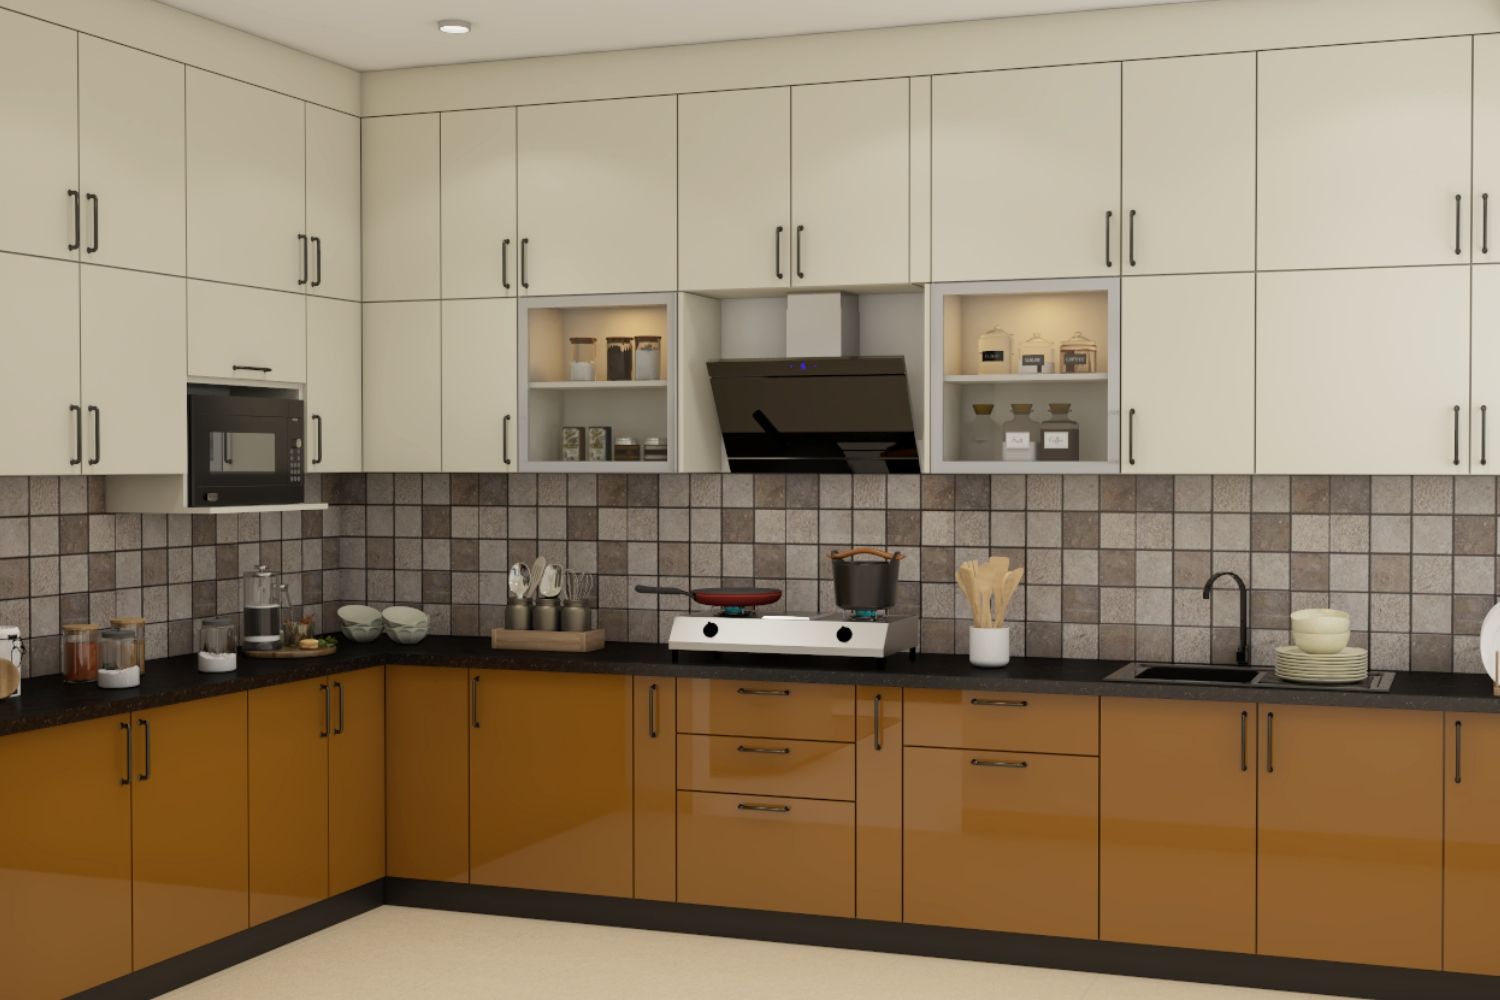 Modern L-Shaped Kitchen Design With Small Square-Shaped Dado Tiles